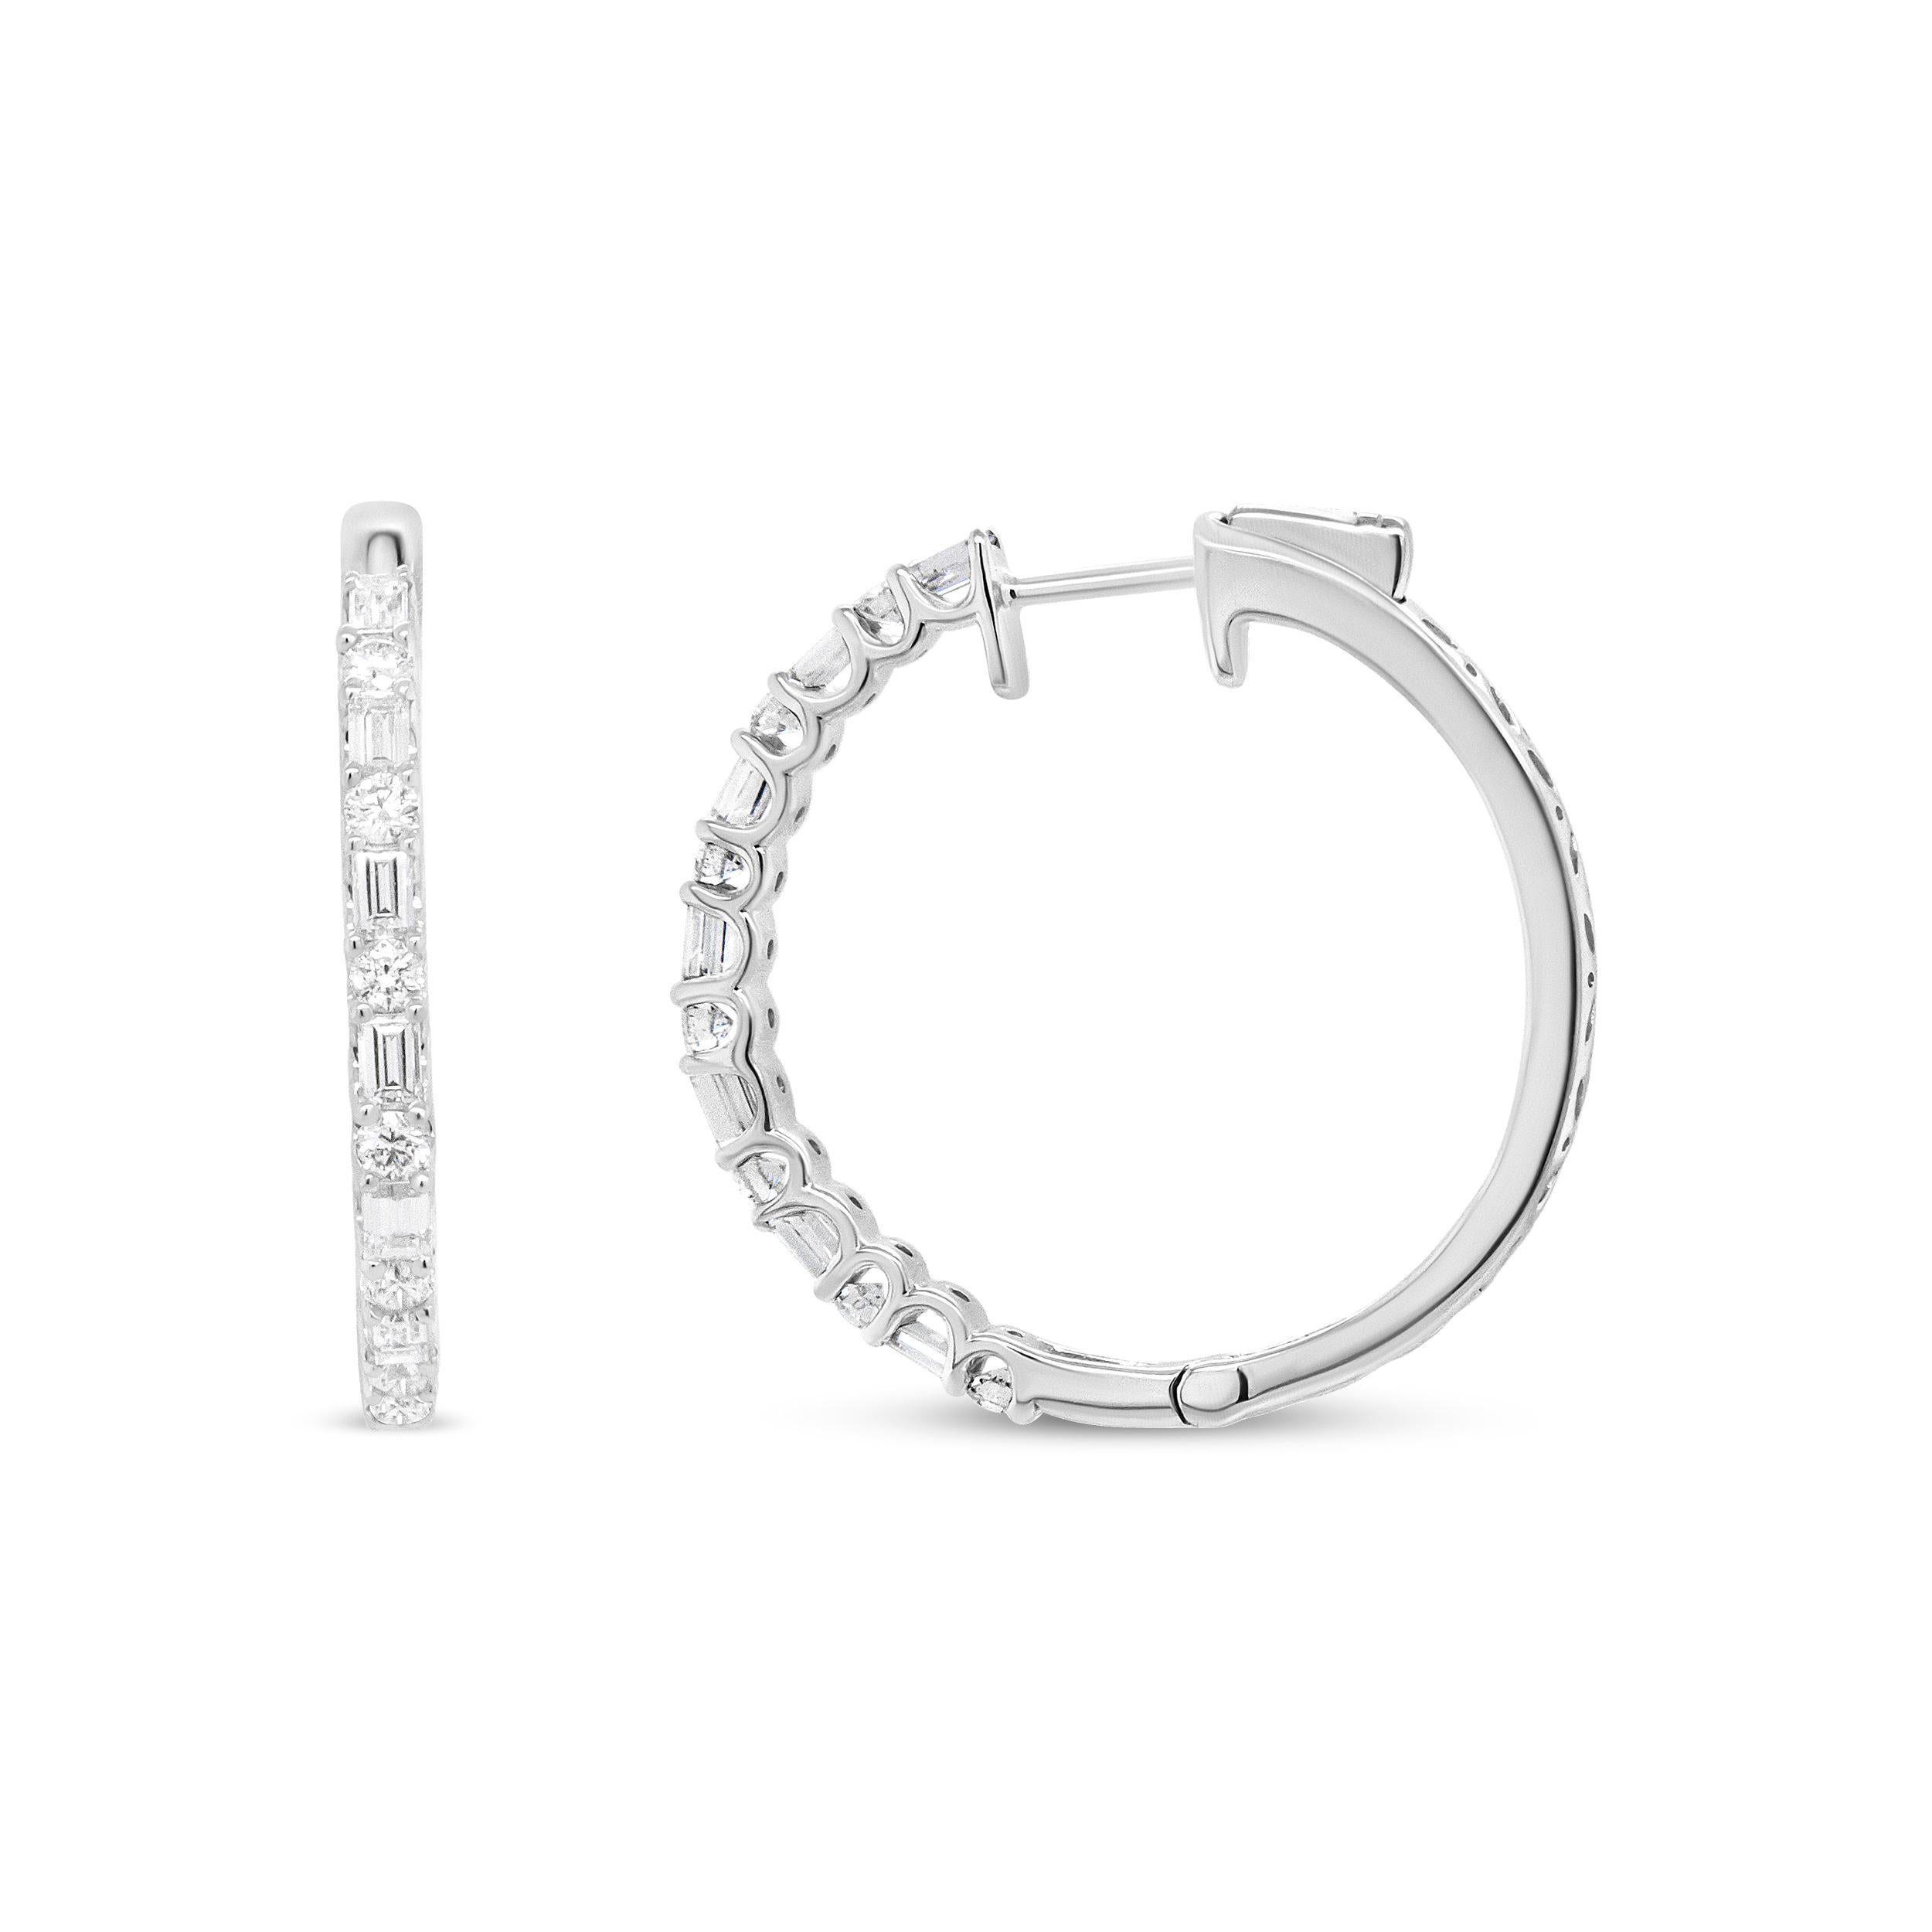 Bask in the sparkle of this pair of diamond hoop earrings crafted from genuine 14k white gold, which is a metal that will stay tarnish free for years to come! An alternating pattern of round and baguette diamonds dazzle from their prong settings,